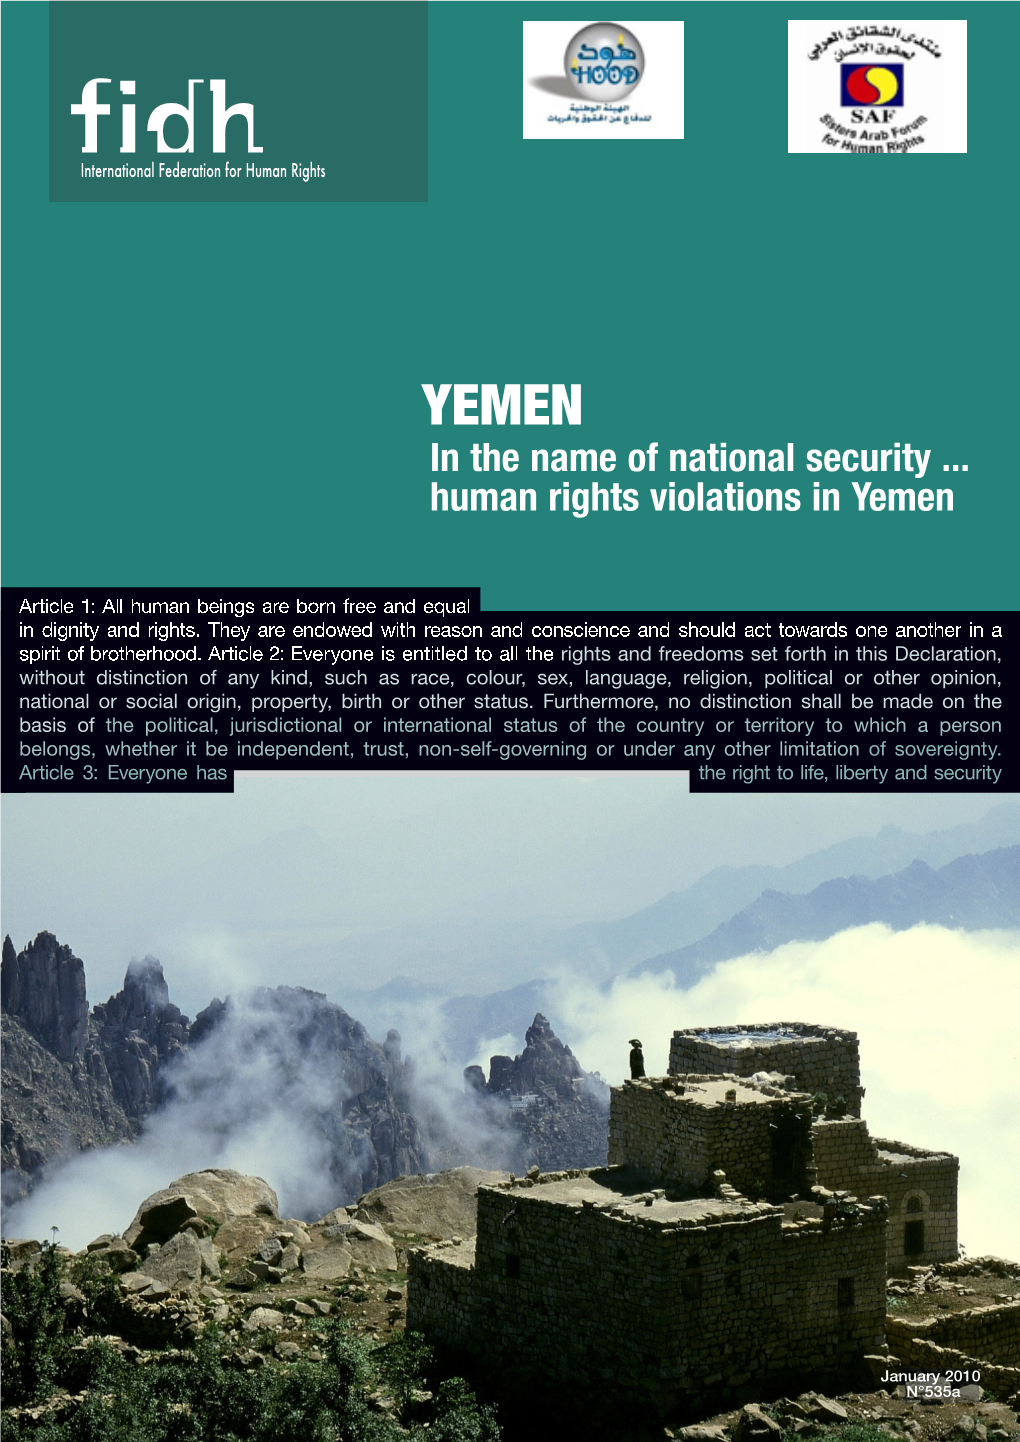 YEMEN in the Name of National Security